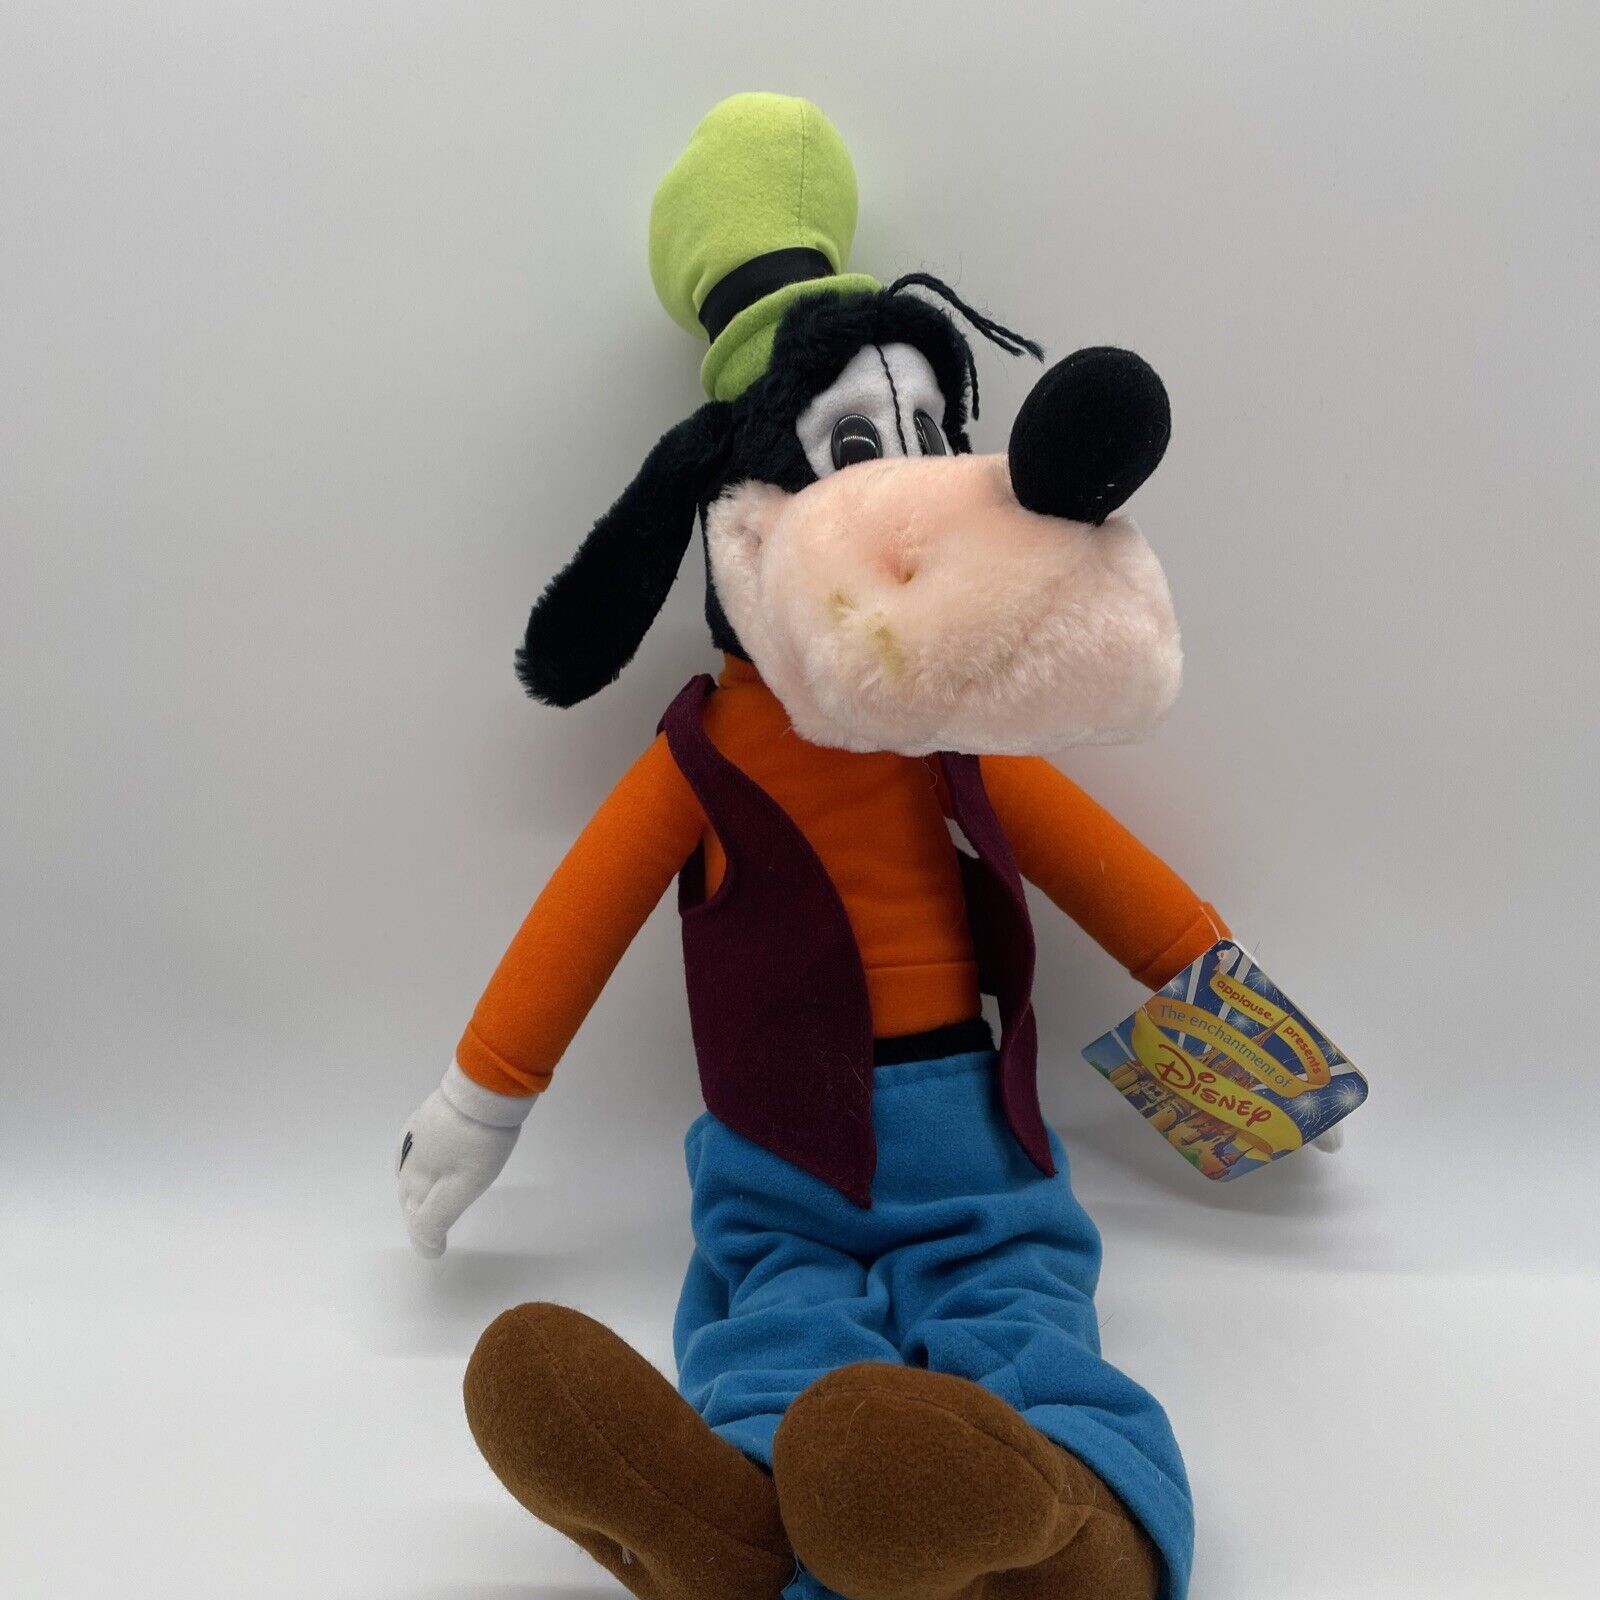 Vintage 1980’s Goofy Plush The Enchantment Of Disney By Applause